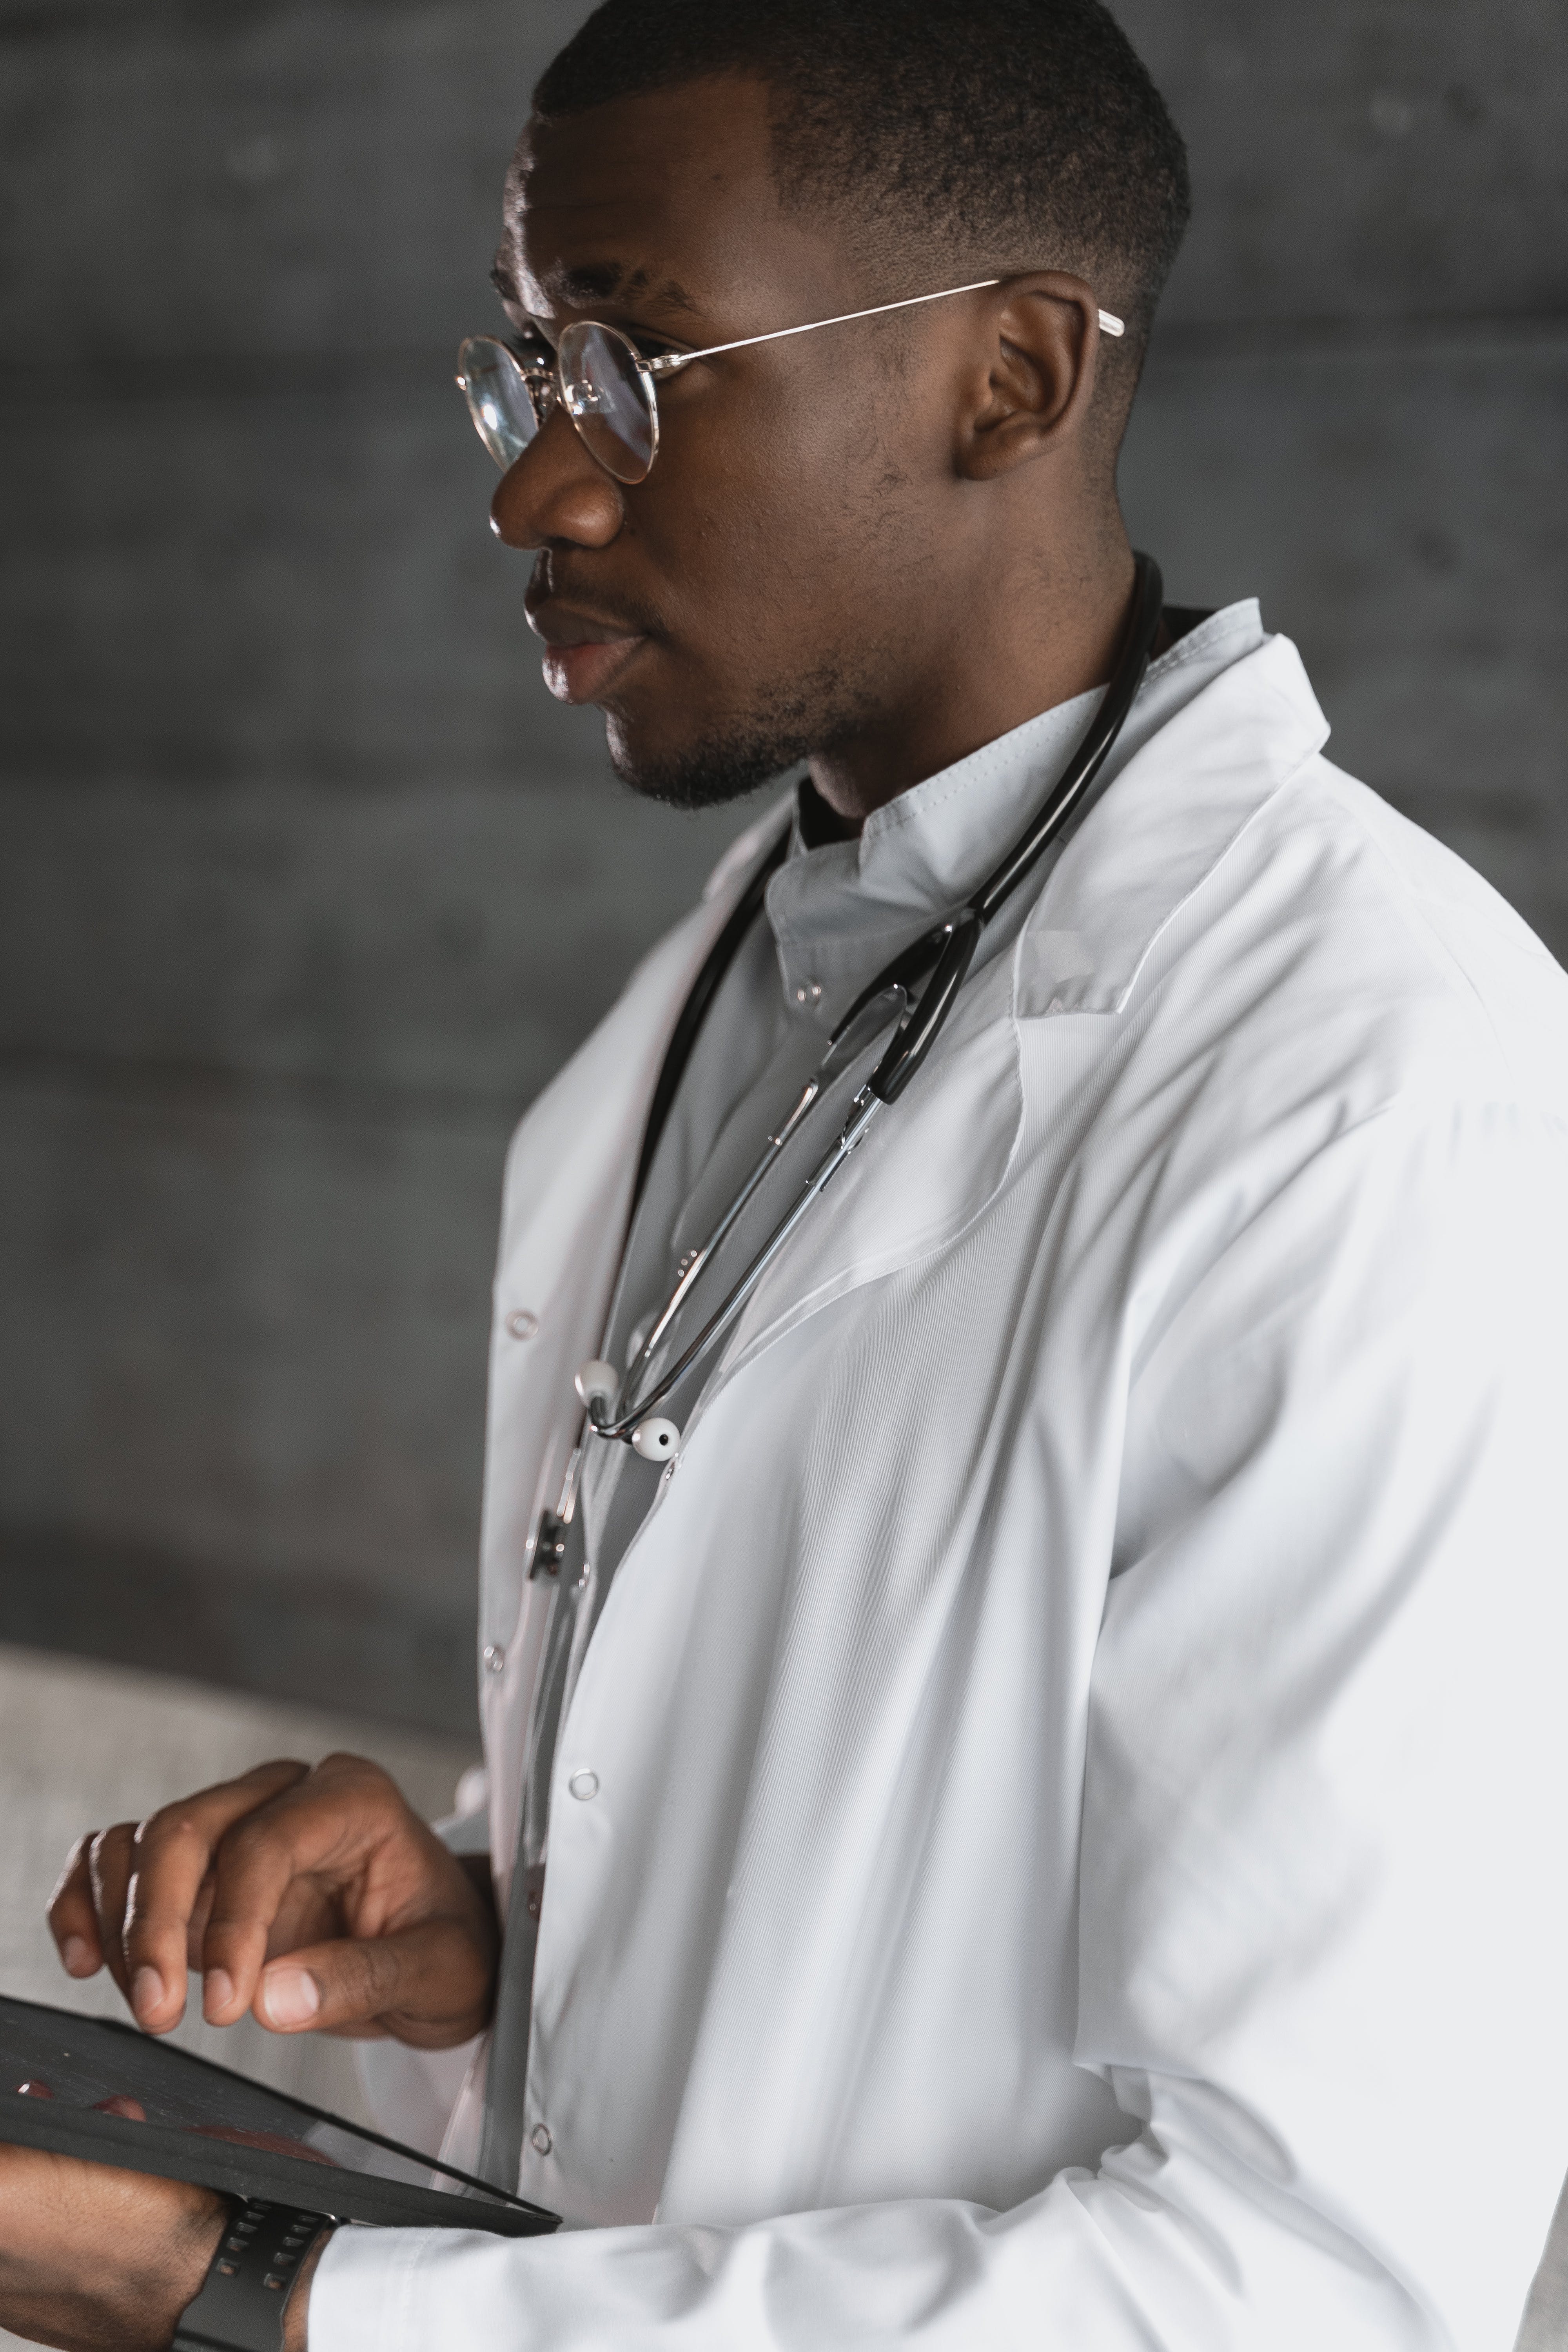 A male doctor. | Source: Pexels